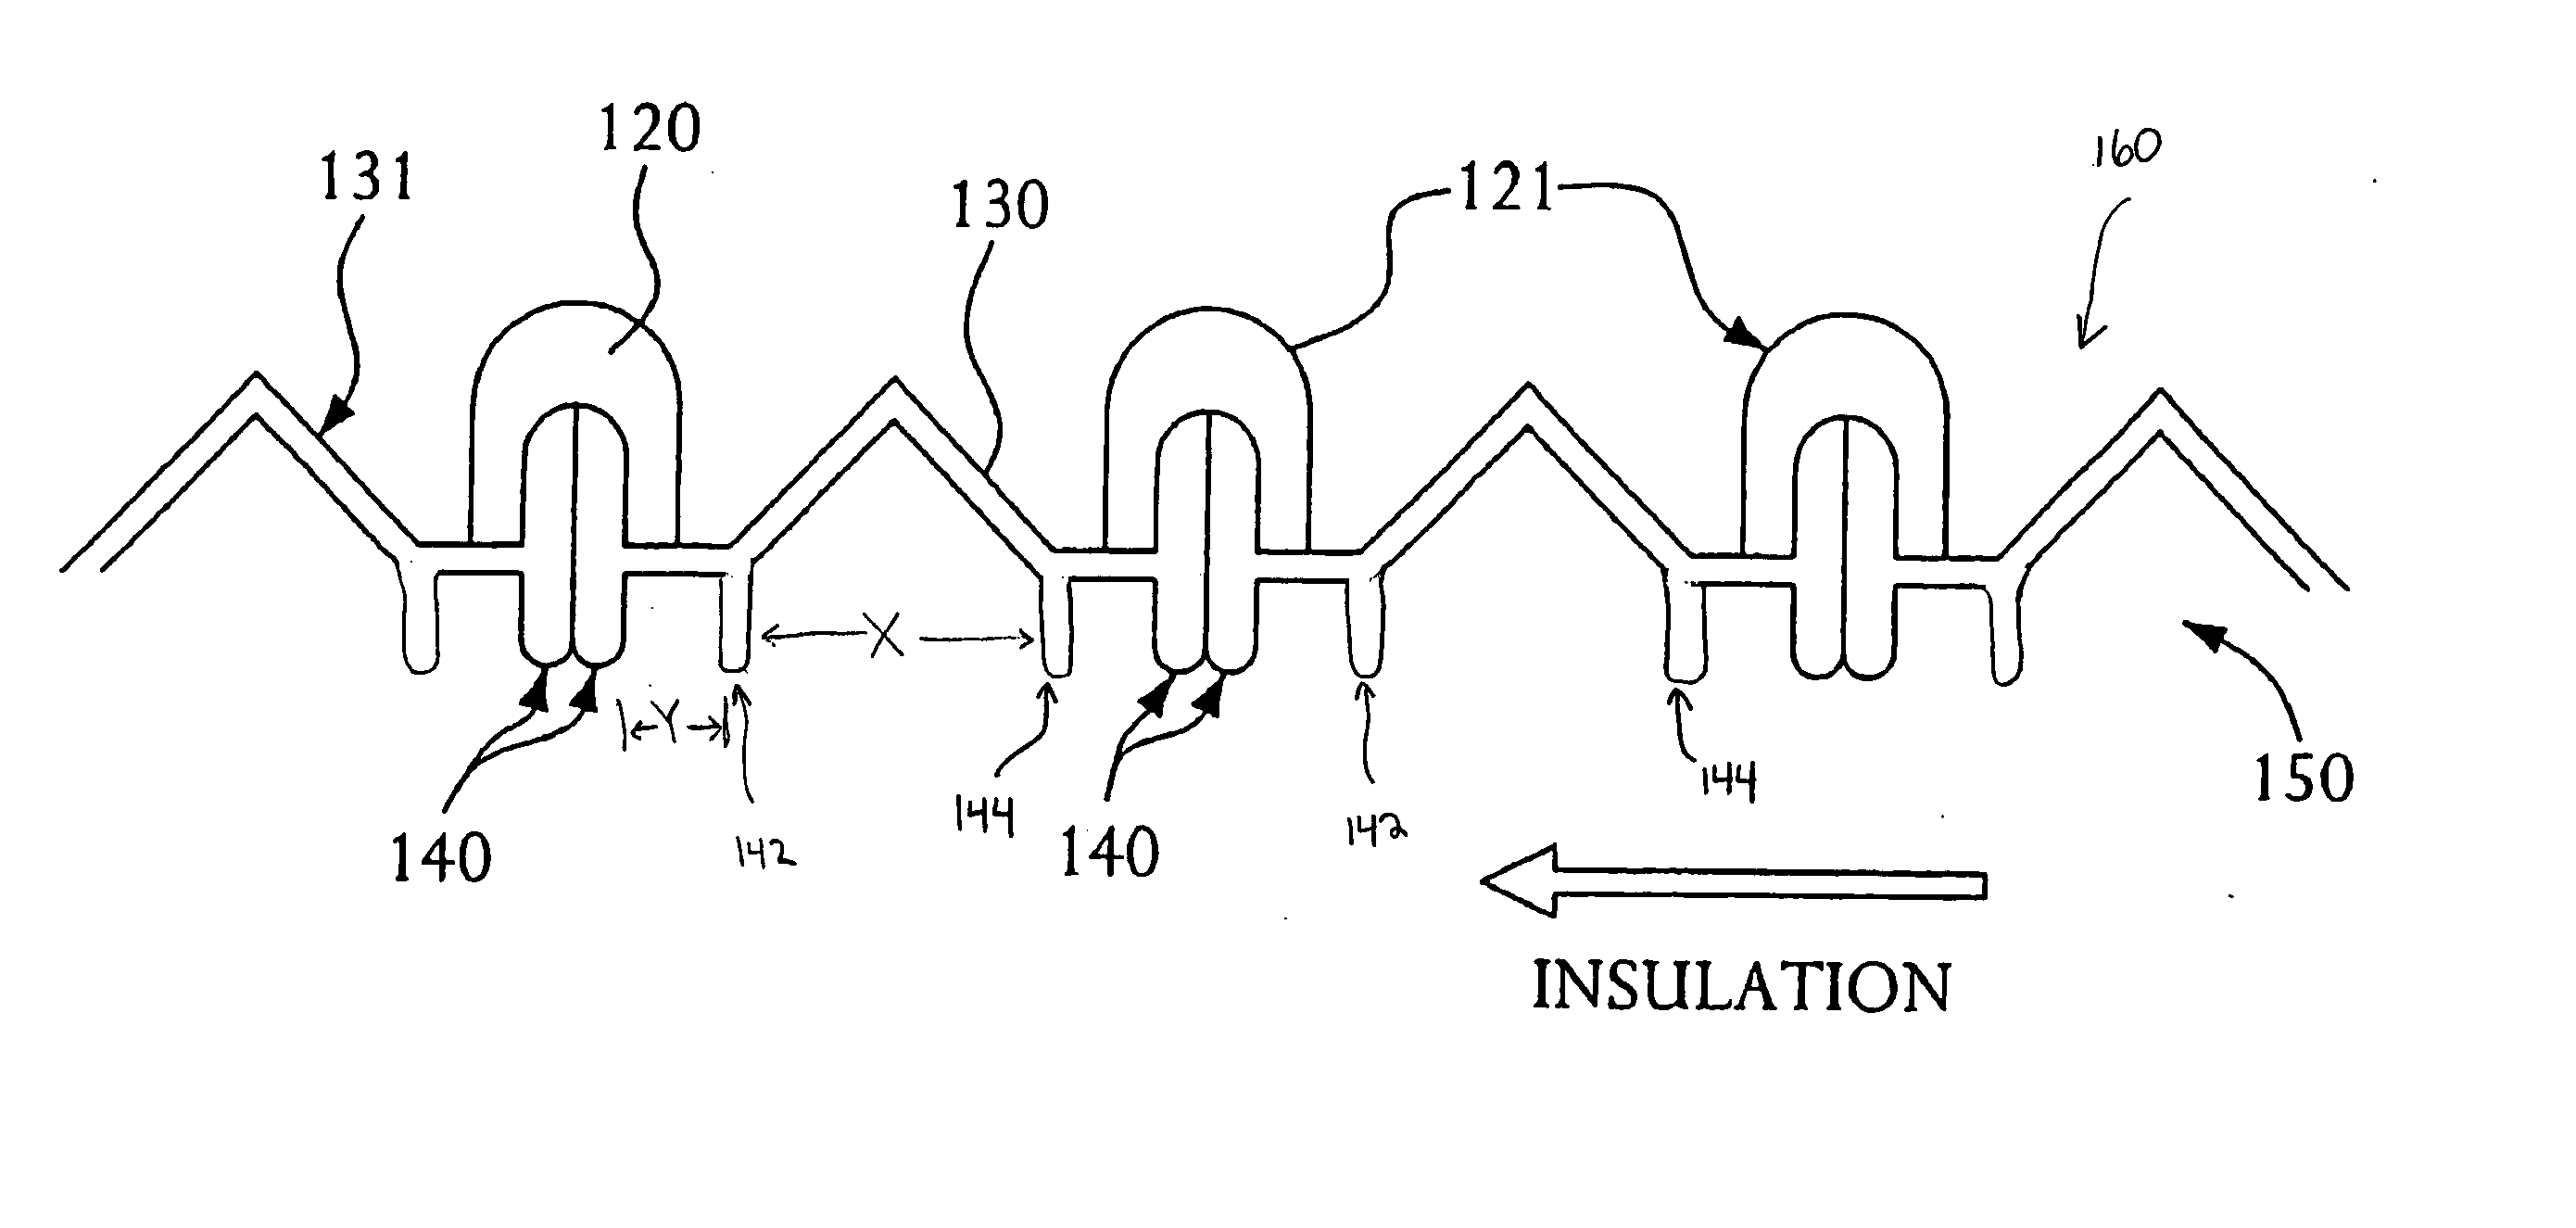 Hose for installing loose fill insulation